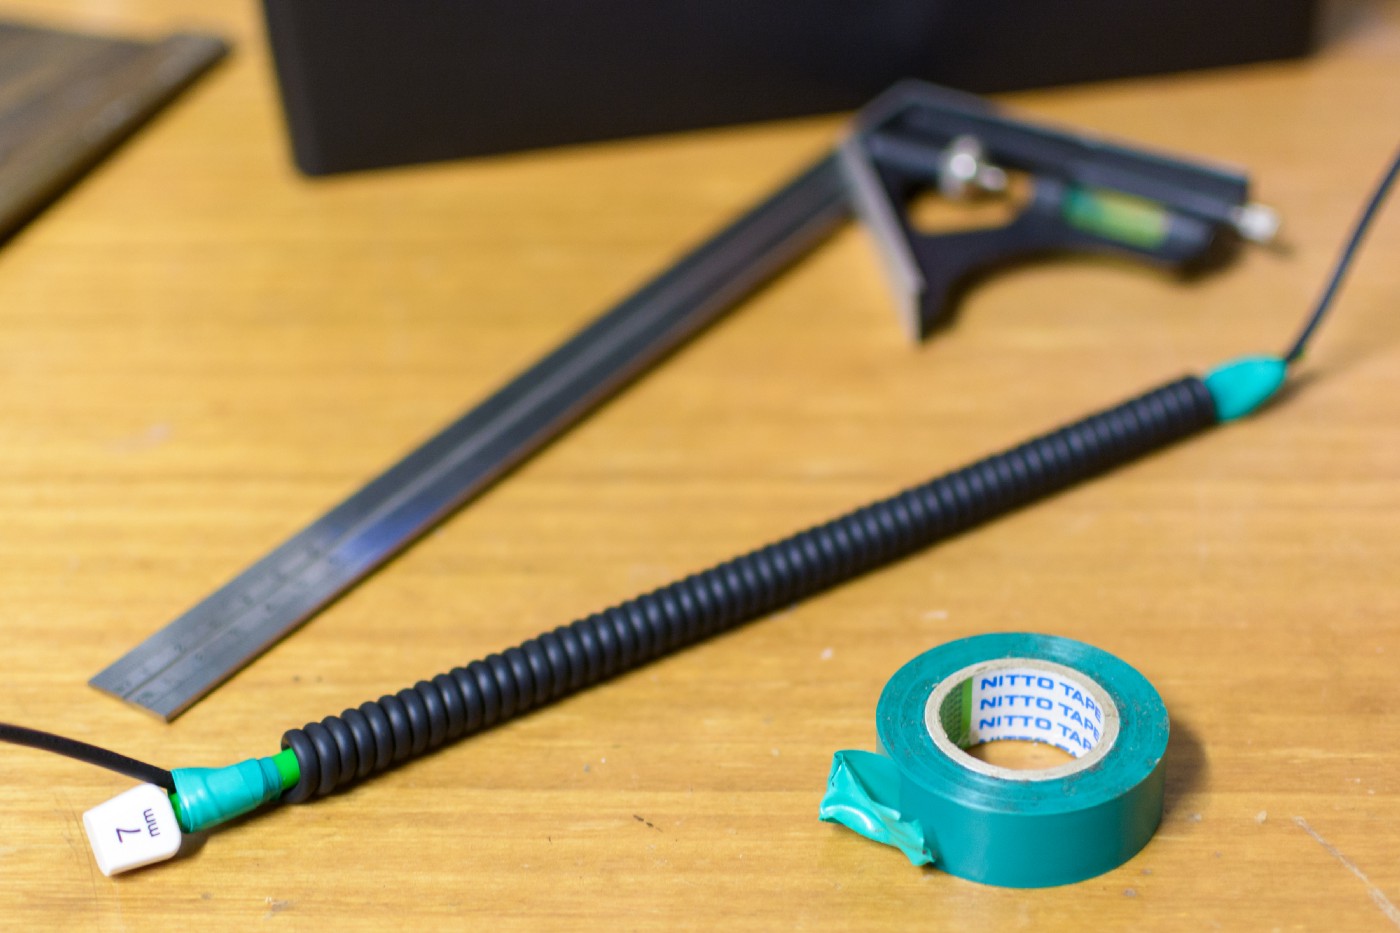 An image of a black cable coiled around a knitting needle, resting on a wooden bench top. There is a roll of green electrical tape sitting nearby